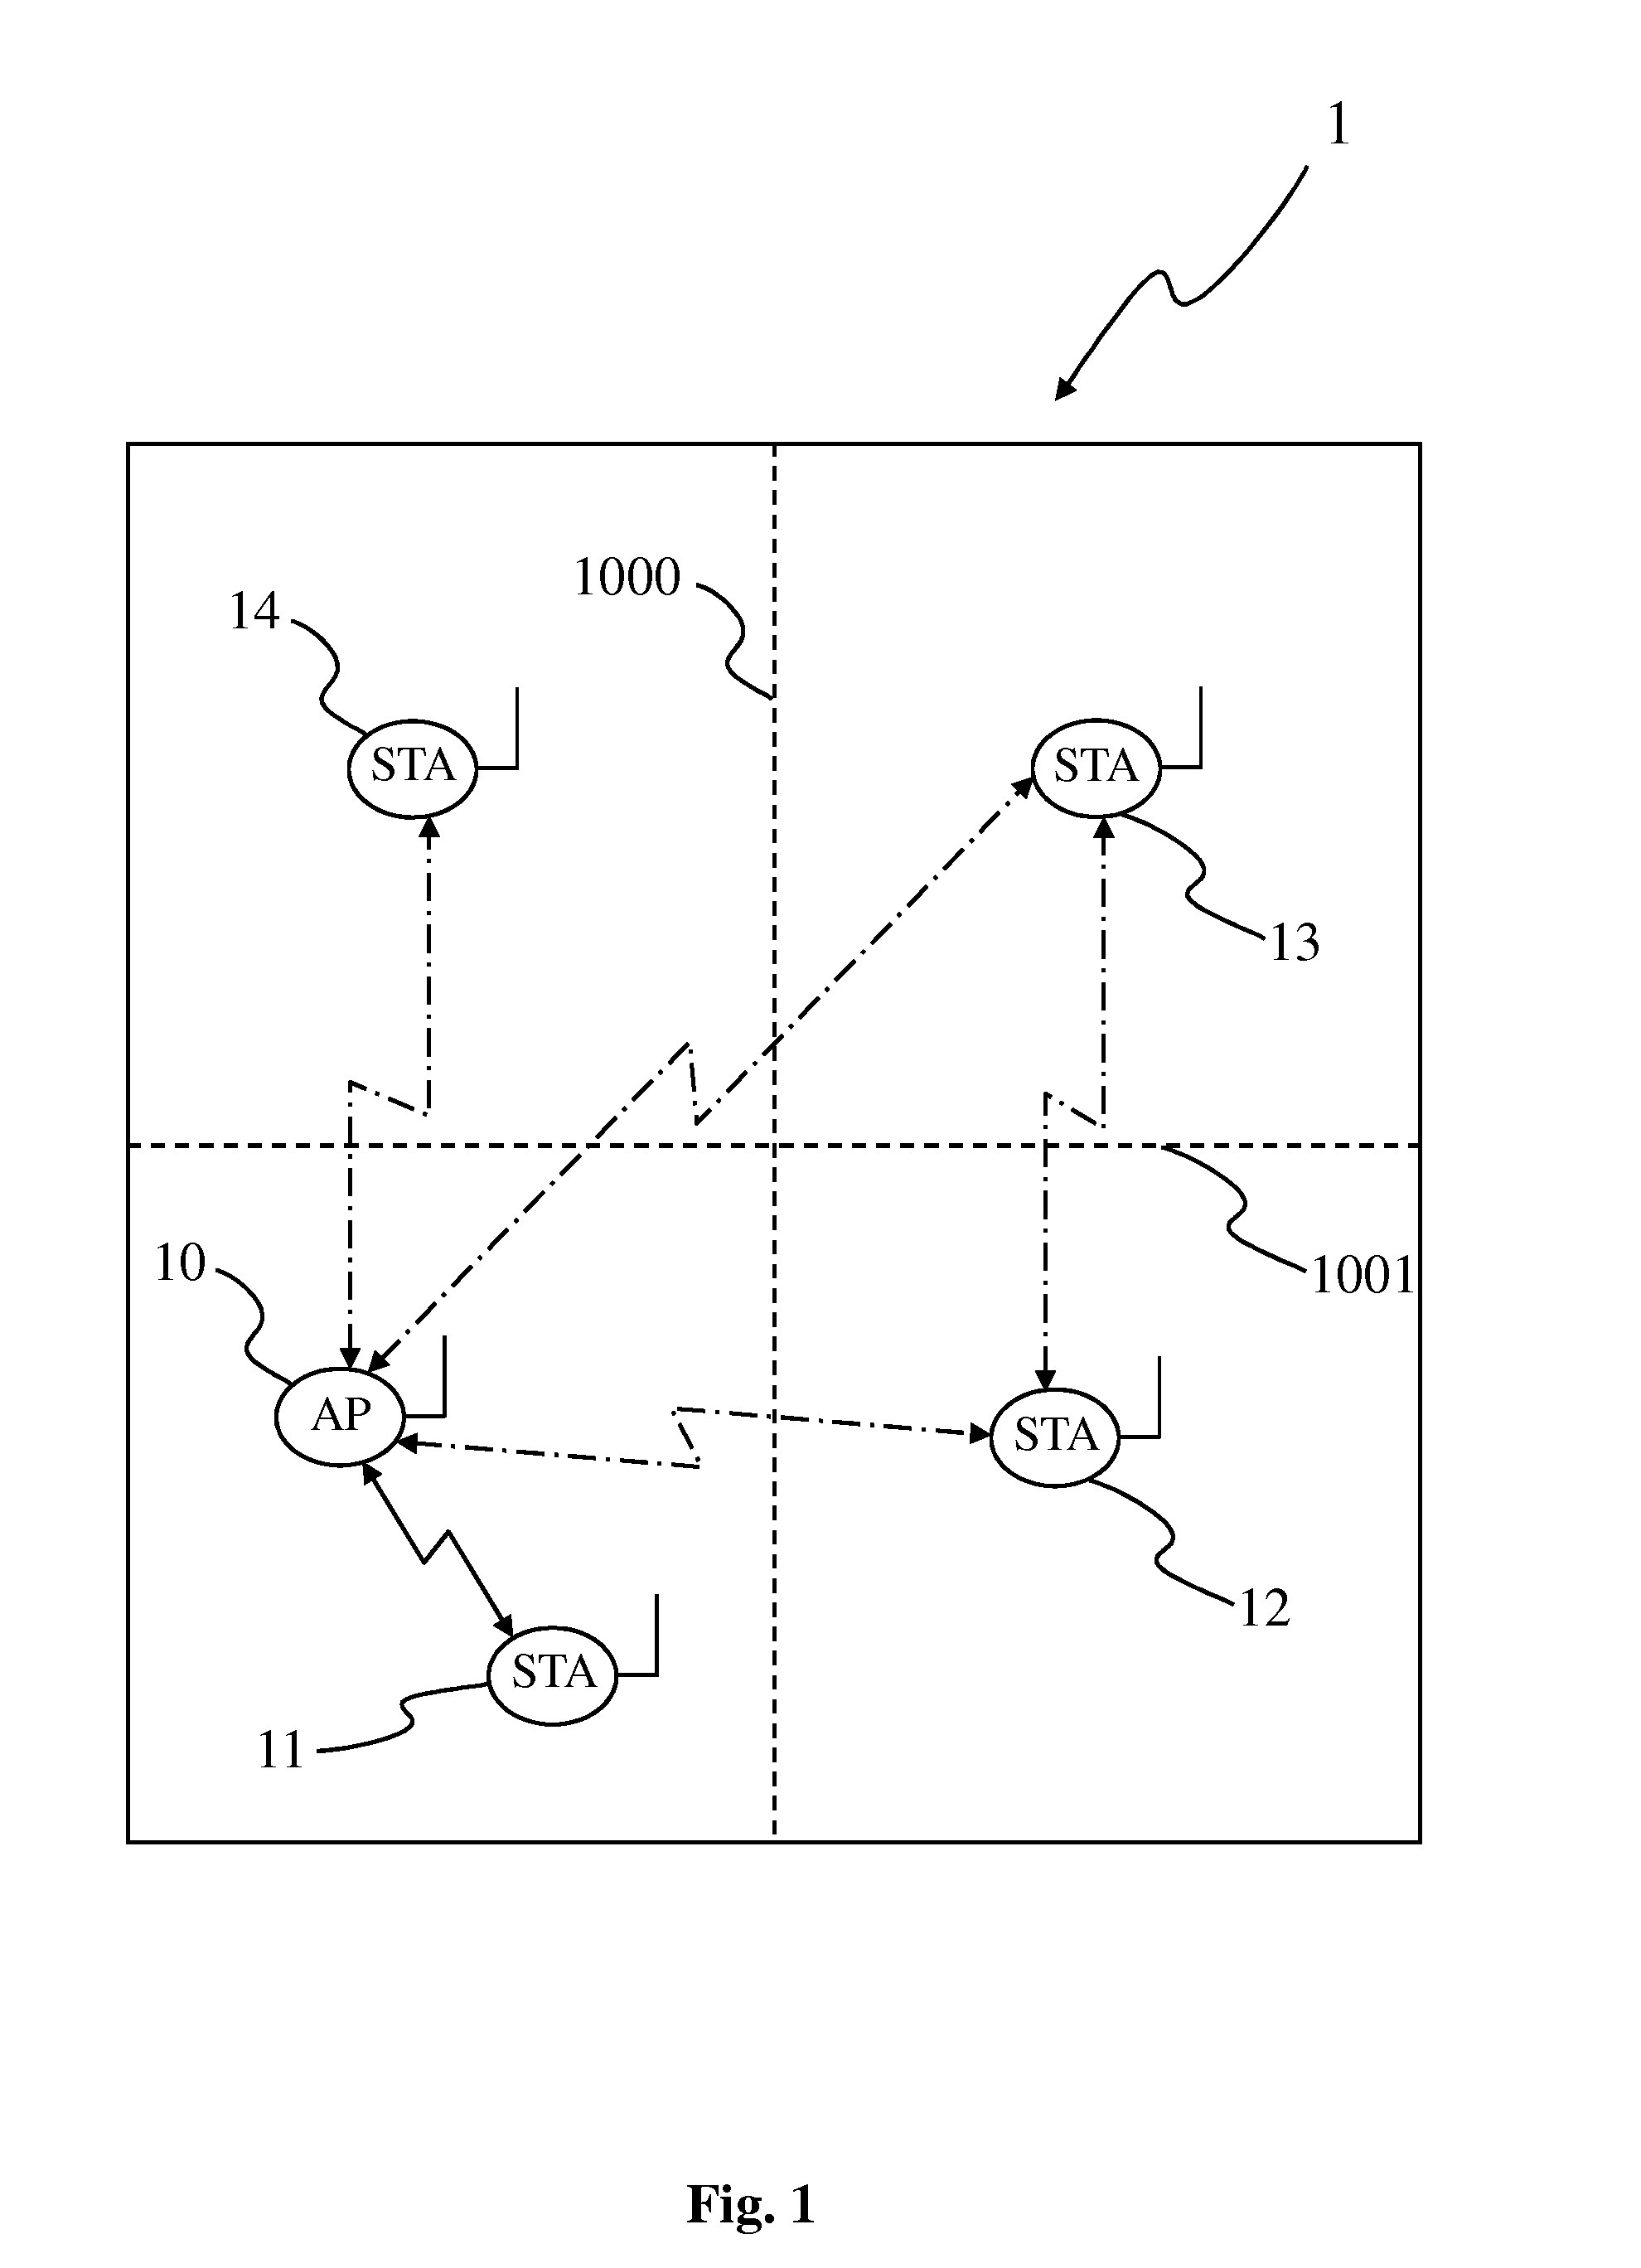 Contention for wireless access using two types of channels